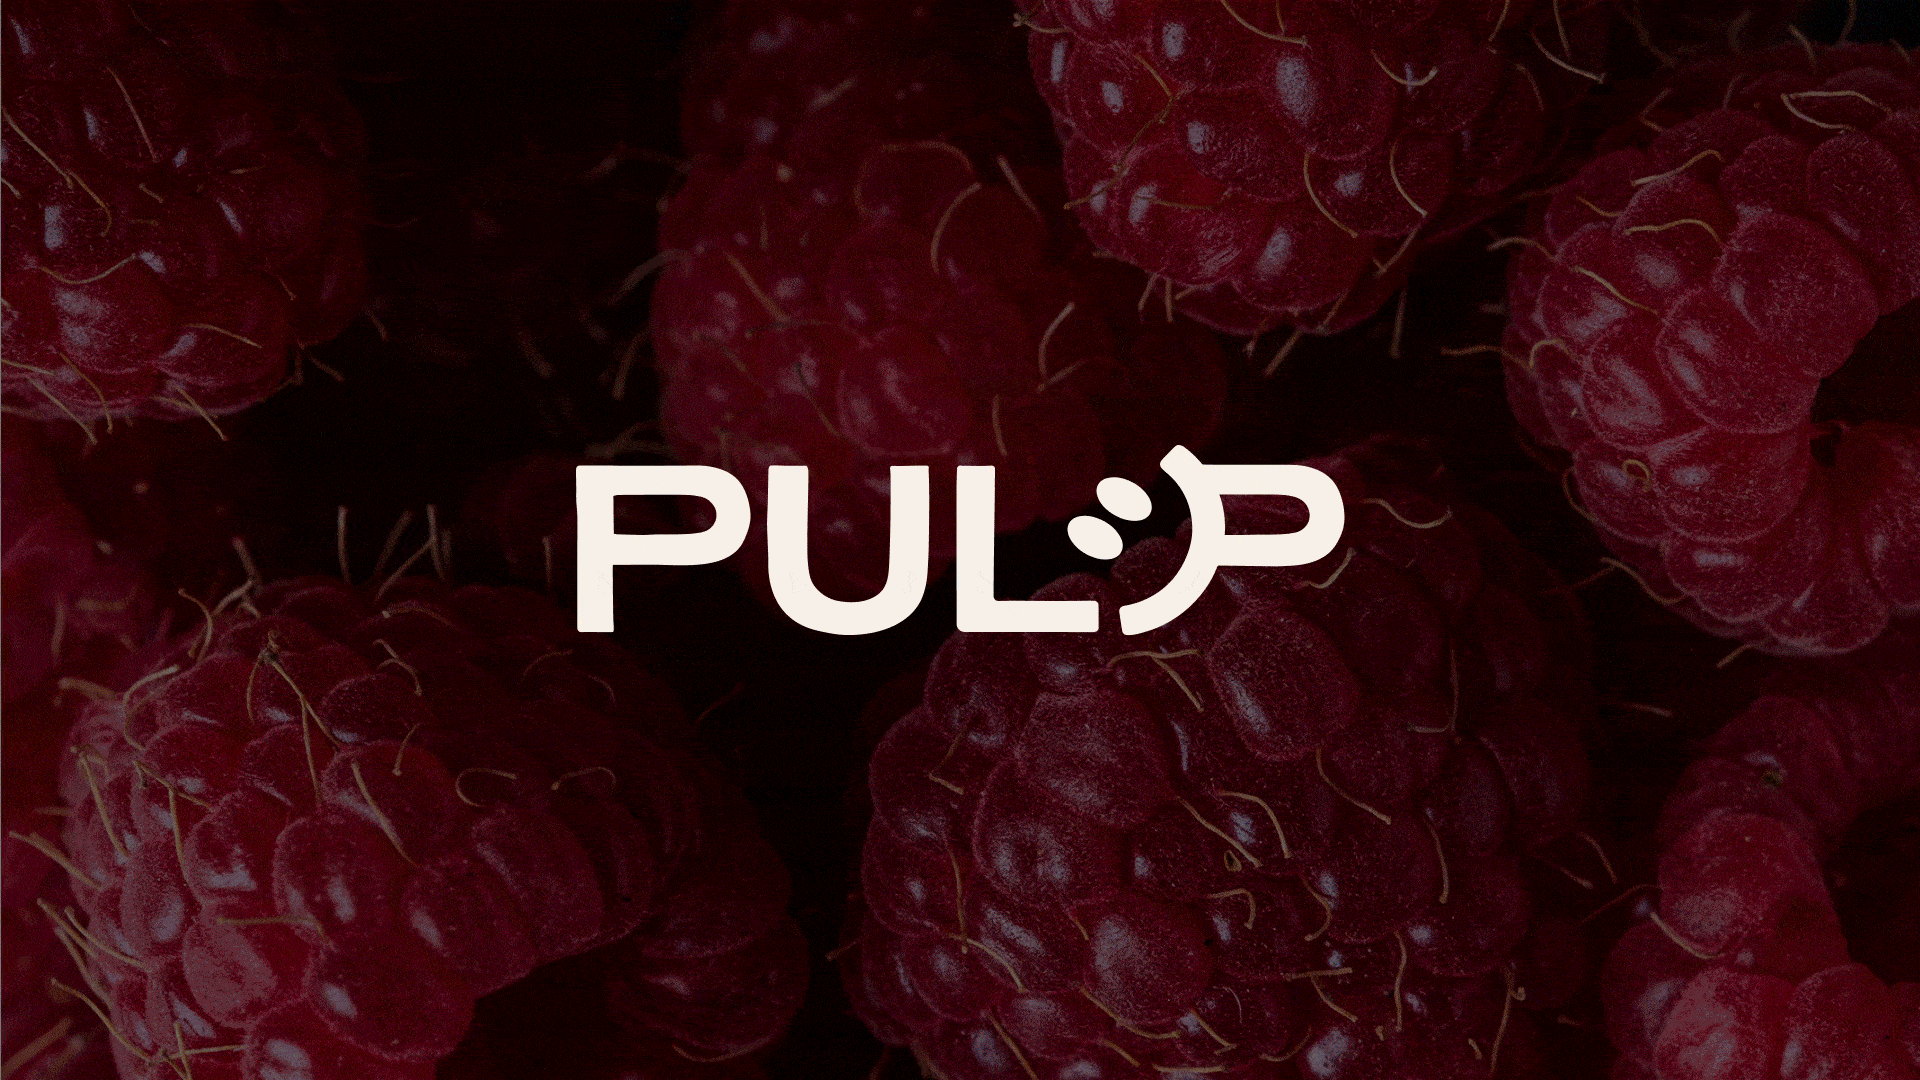 Brand assets for pulp a brand that aims to rethink, remanufacture, and reinvent fruit waste